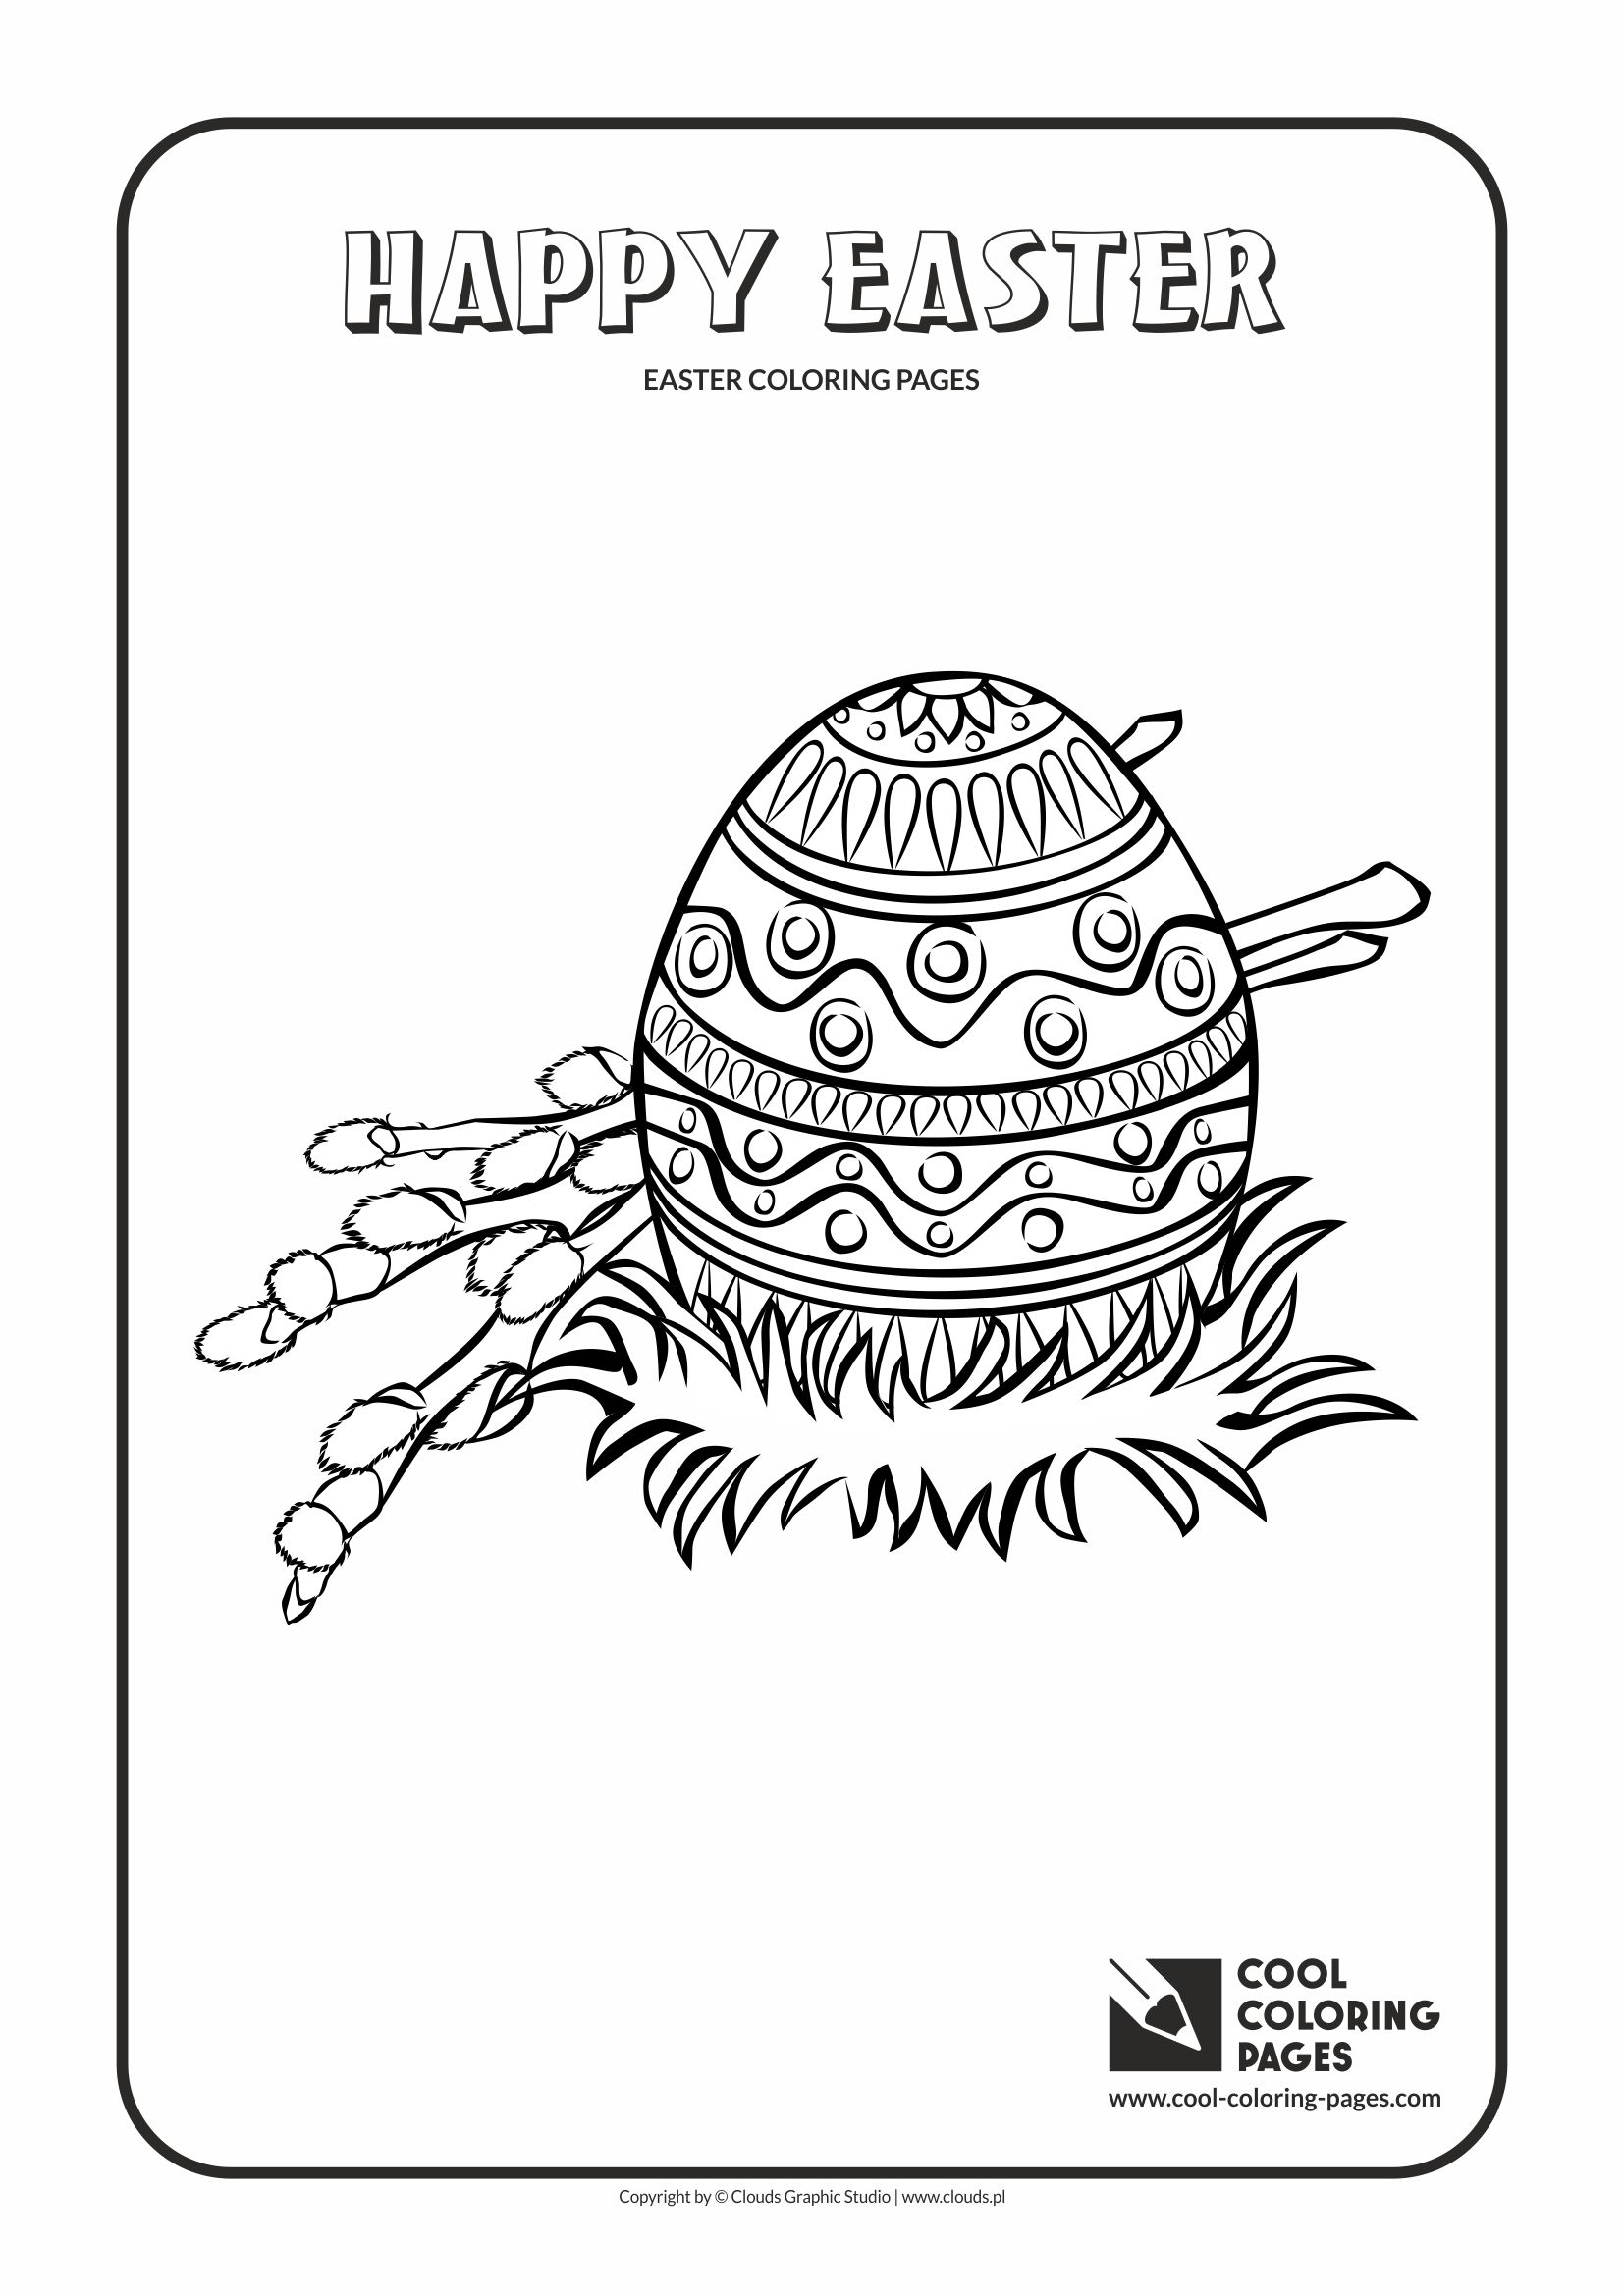 Cool Coloring Pages - Holidays / Easter egg no 1 / Coloring page with Easter egg no 1